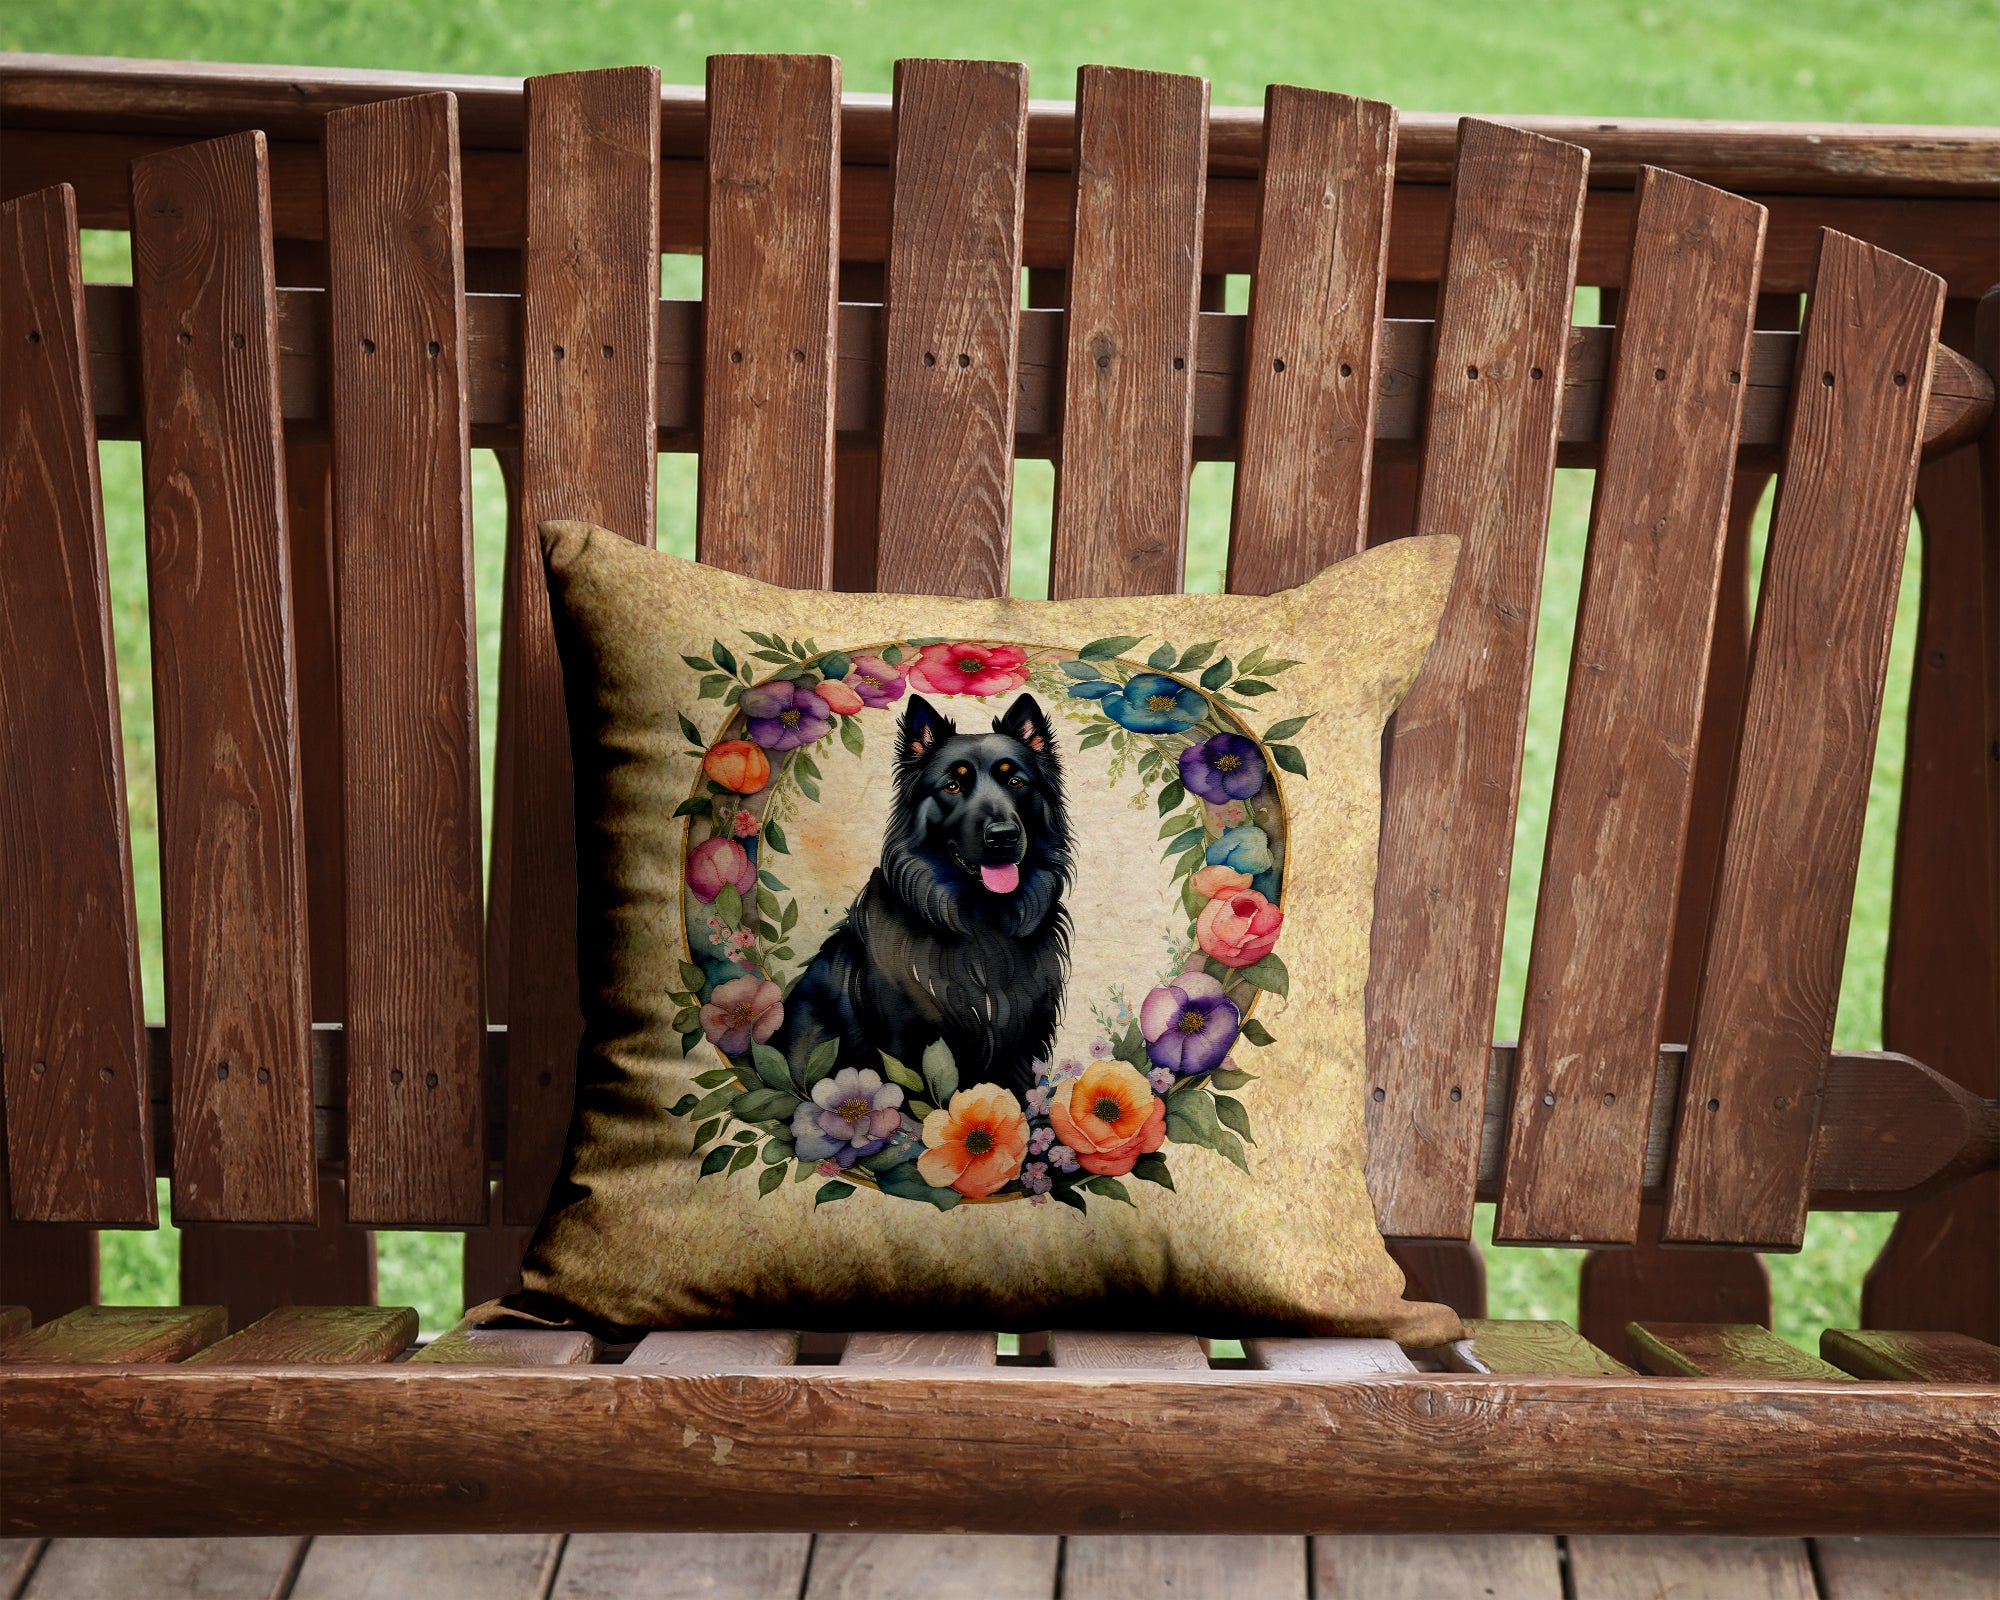 Belgian Sheepdog and Flowers Fabric Decorative Pillow  the-store.com.